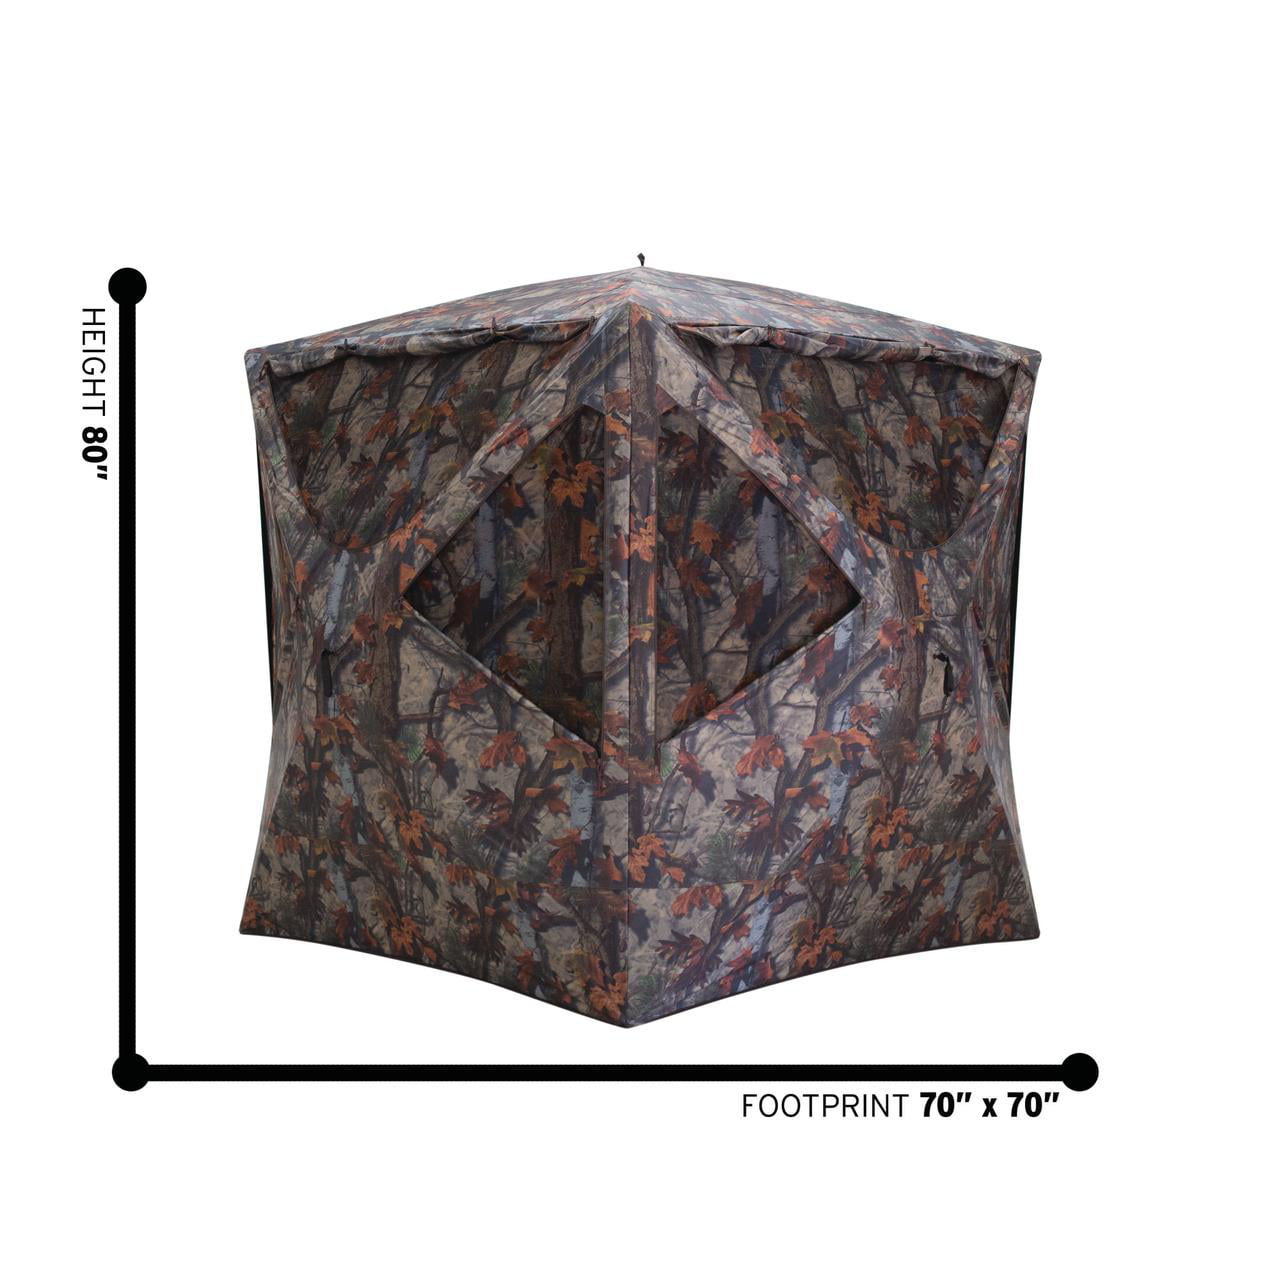 Details about   New Barronett Prowler 300 Tall Pop-Up Portable Hunting Blind Woodland Camo 